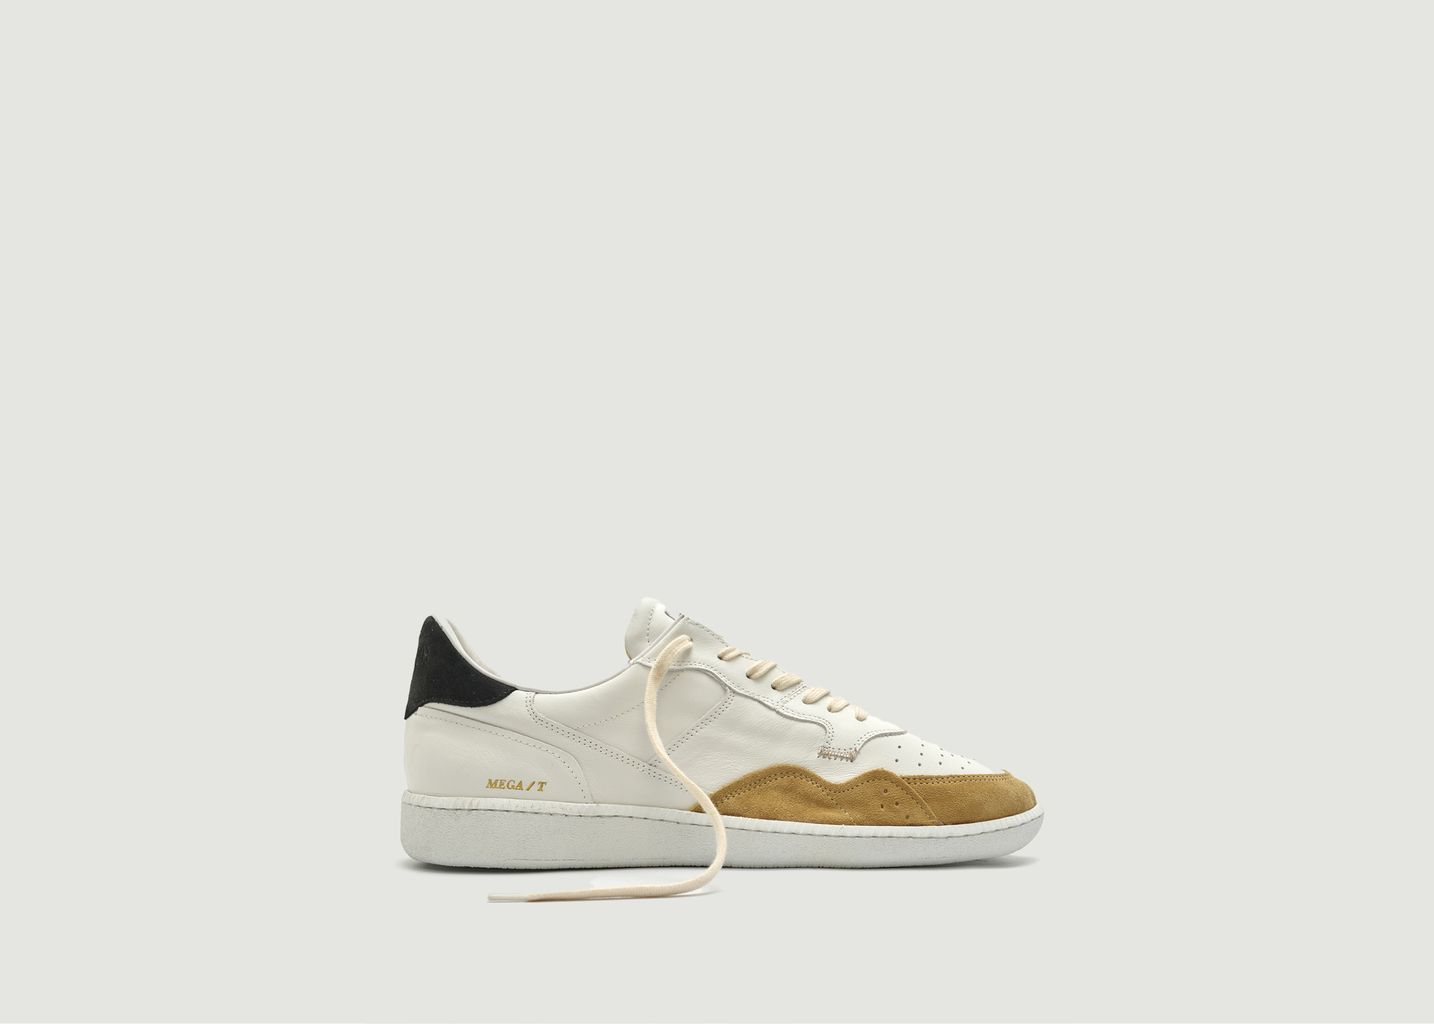 Mega T low leather sneakers - Hidnander